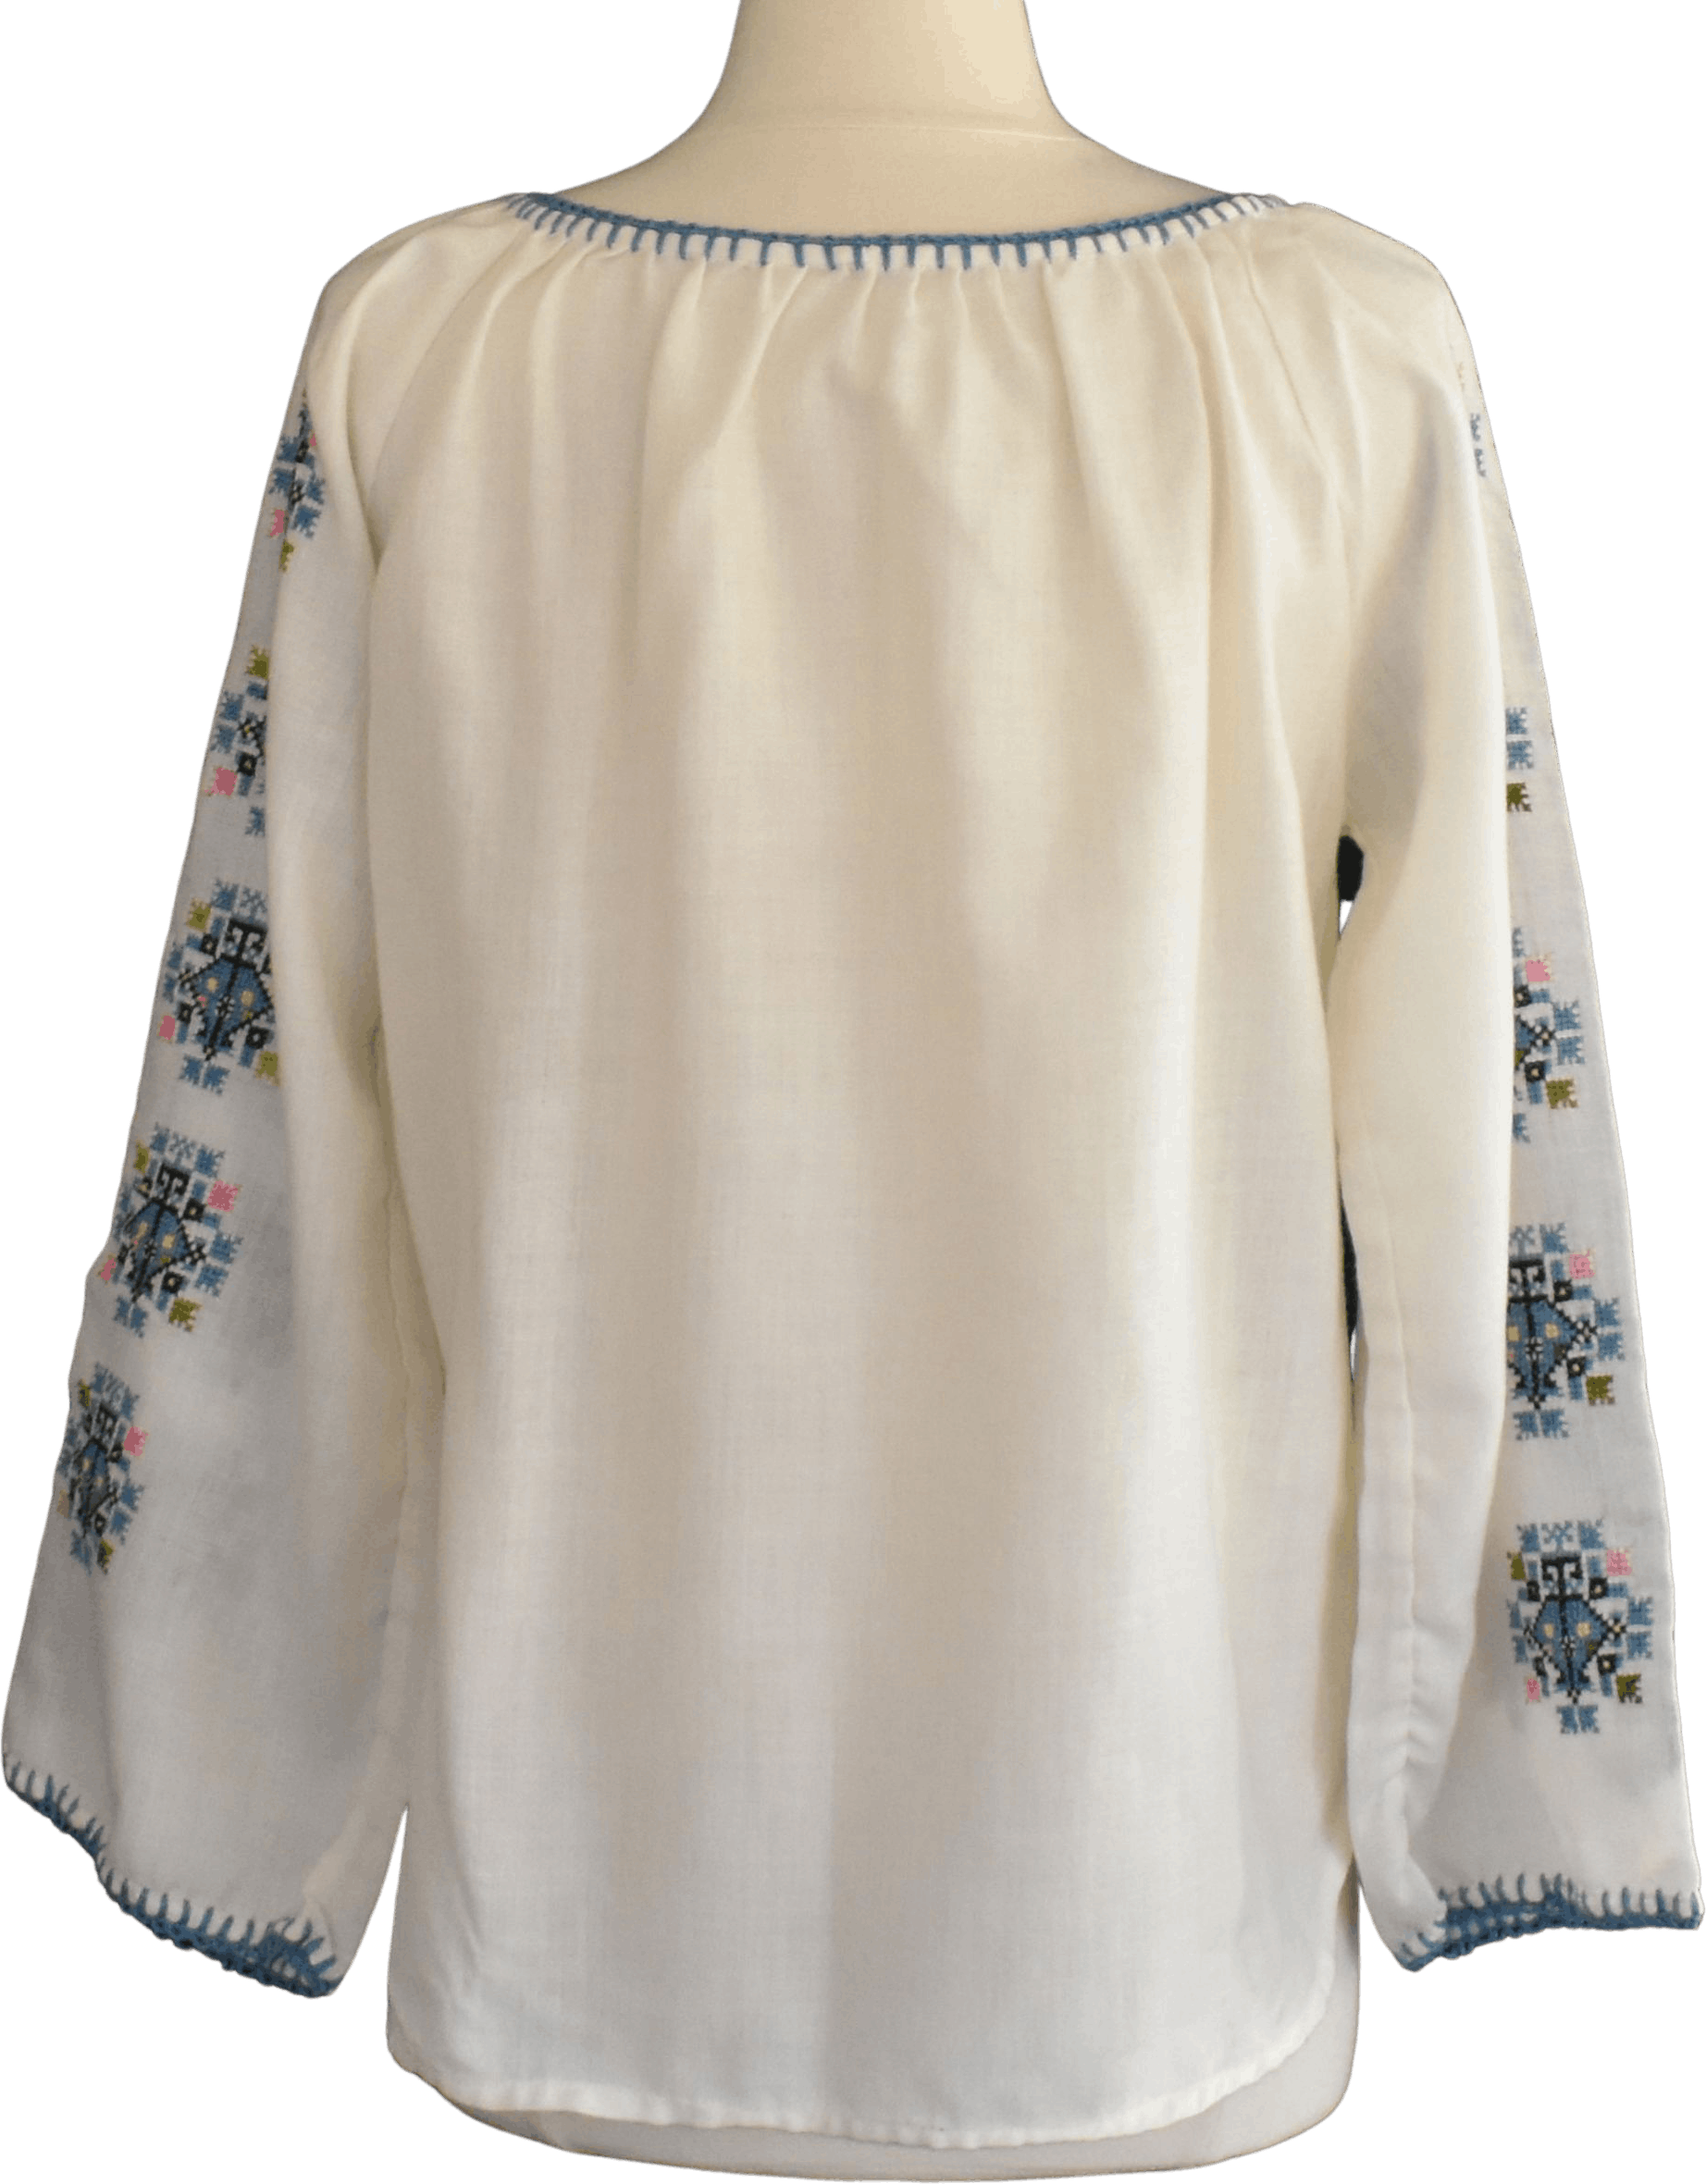 Vintage 70's Blue and White Hand Embroidered Blouse | Shop THRILLING